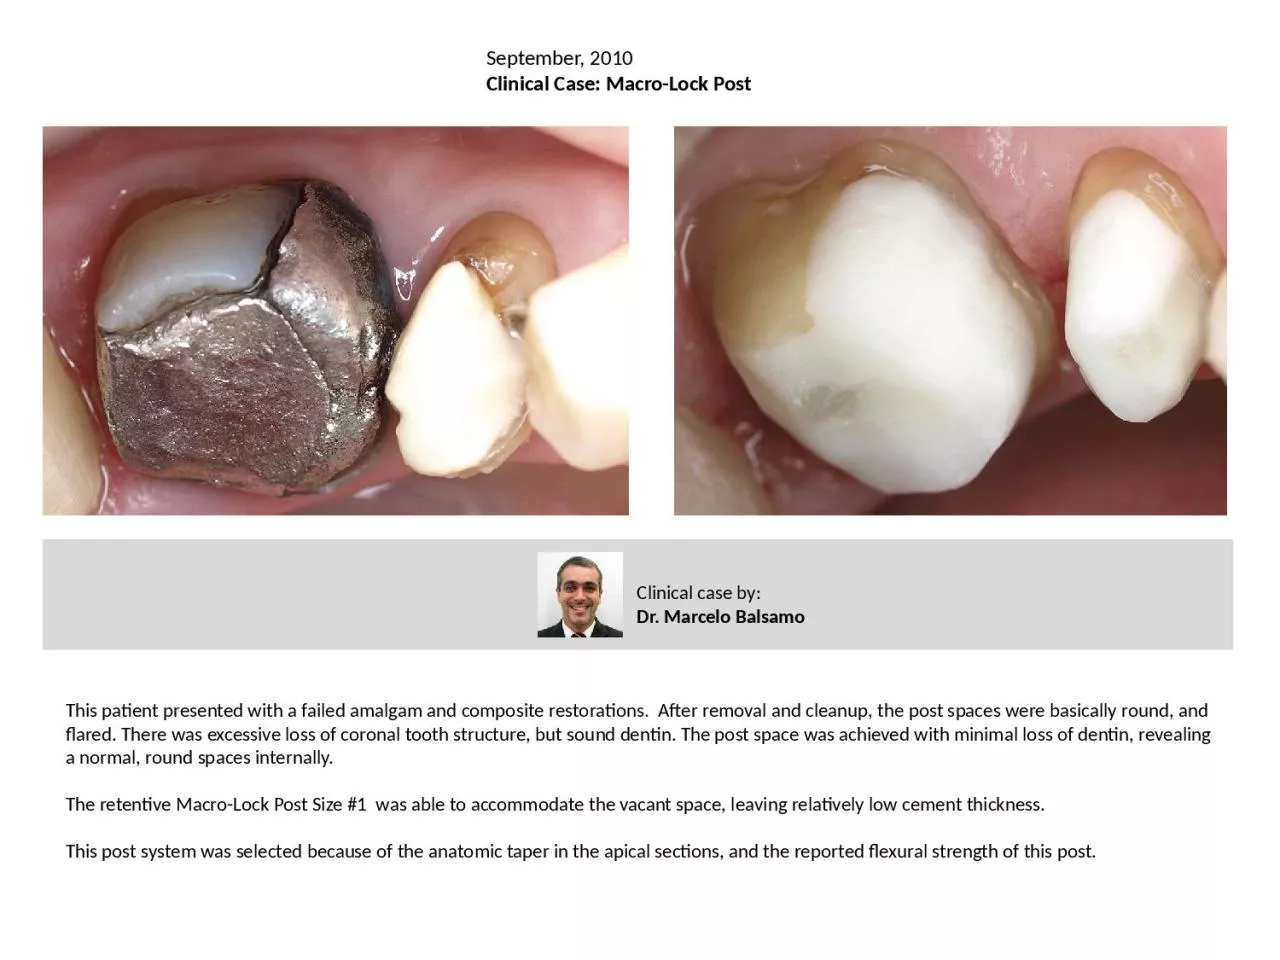 This patient presented with a failed amalgam and composite restorations.  After removal